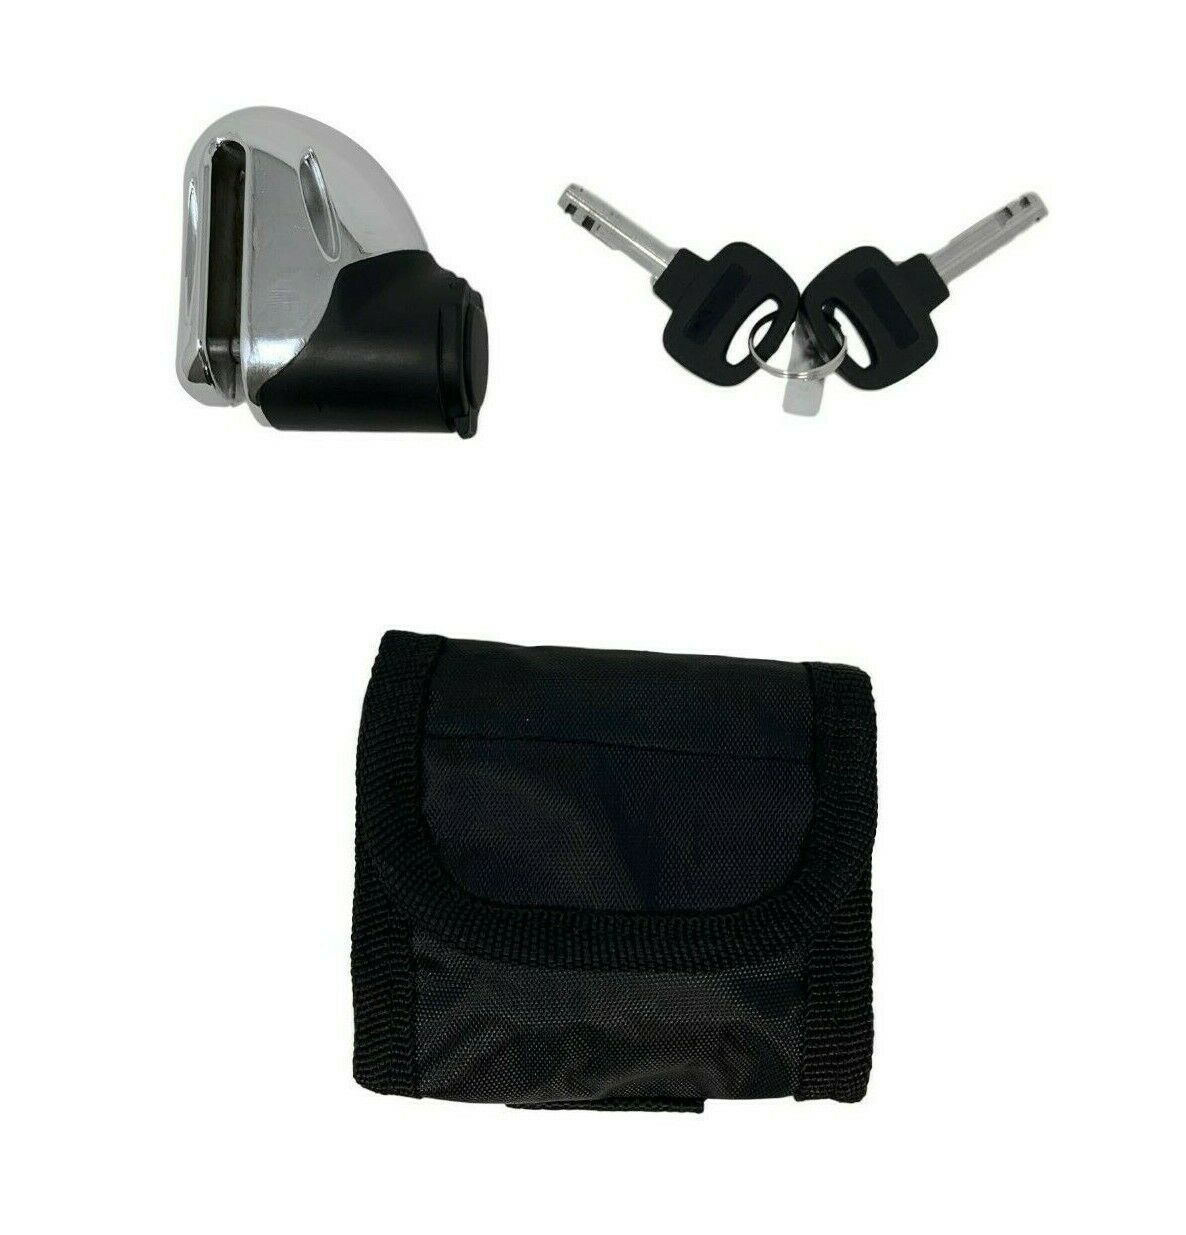 Areo E-Scooter Heavy Duty Disc Lock With Pouch - Chrome - 2 Keys - 5.5mm Pin - Sportandleisure.com (6968029773978)